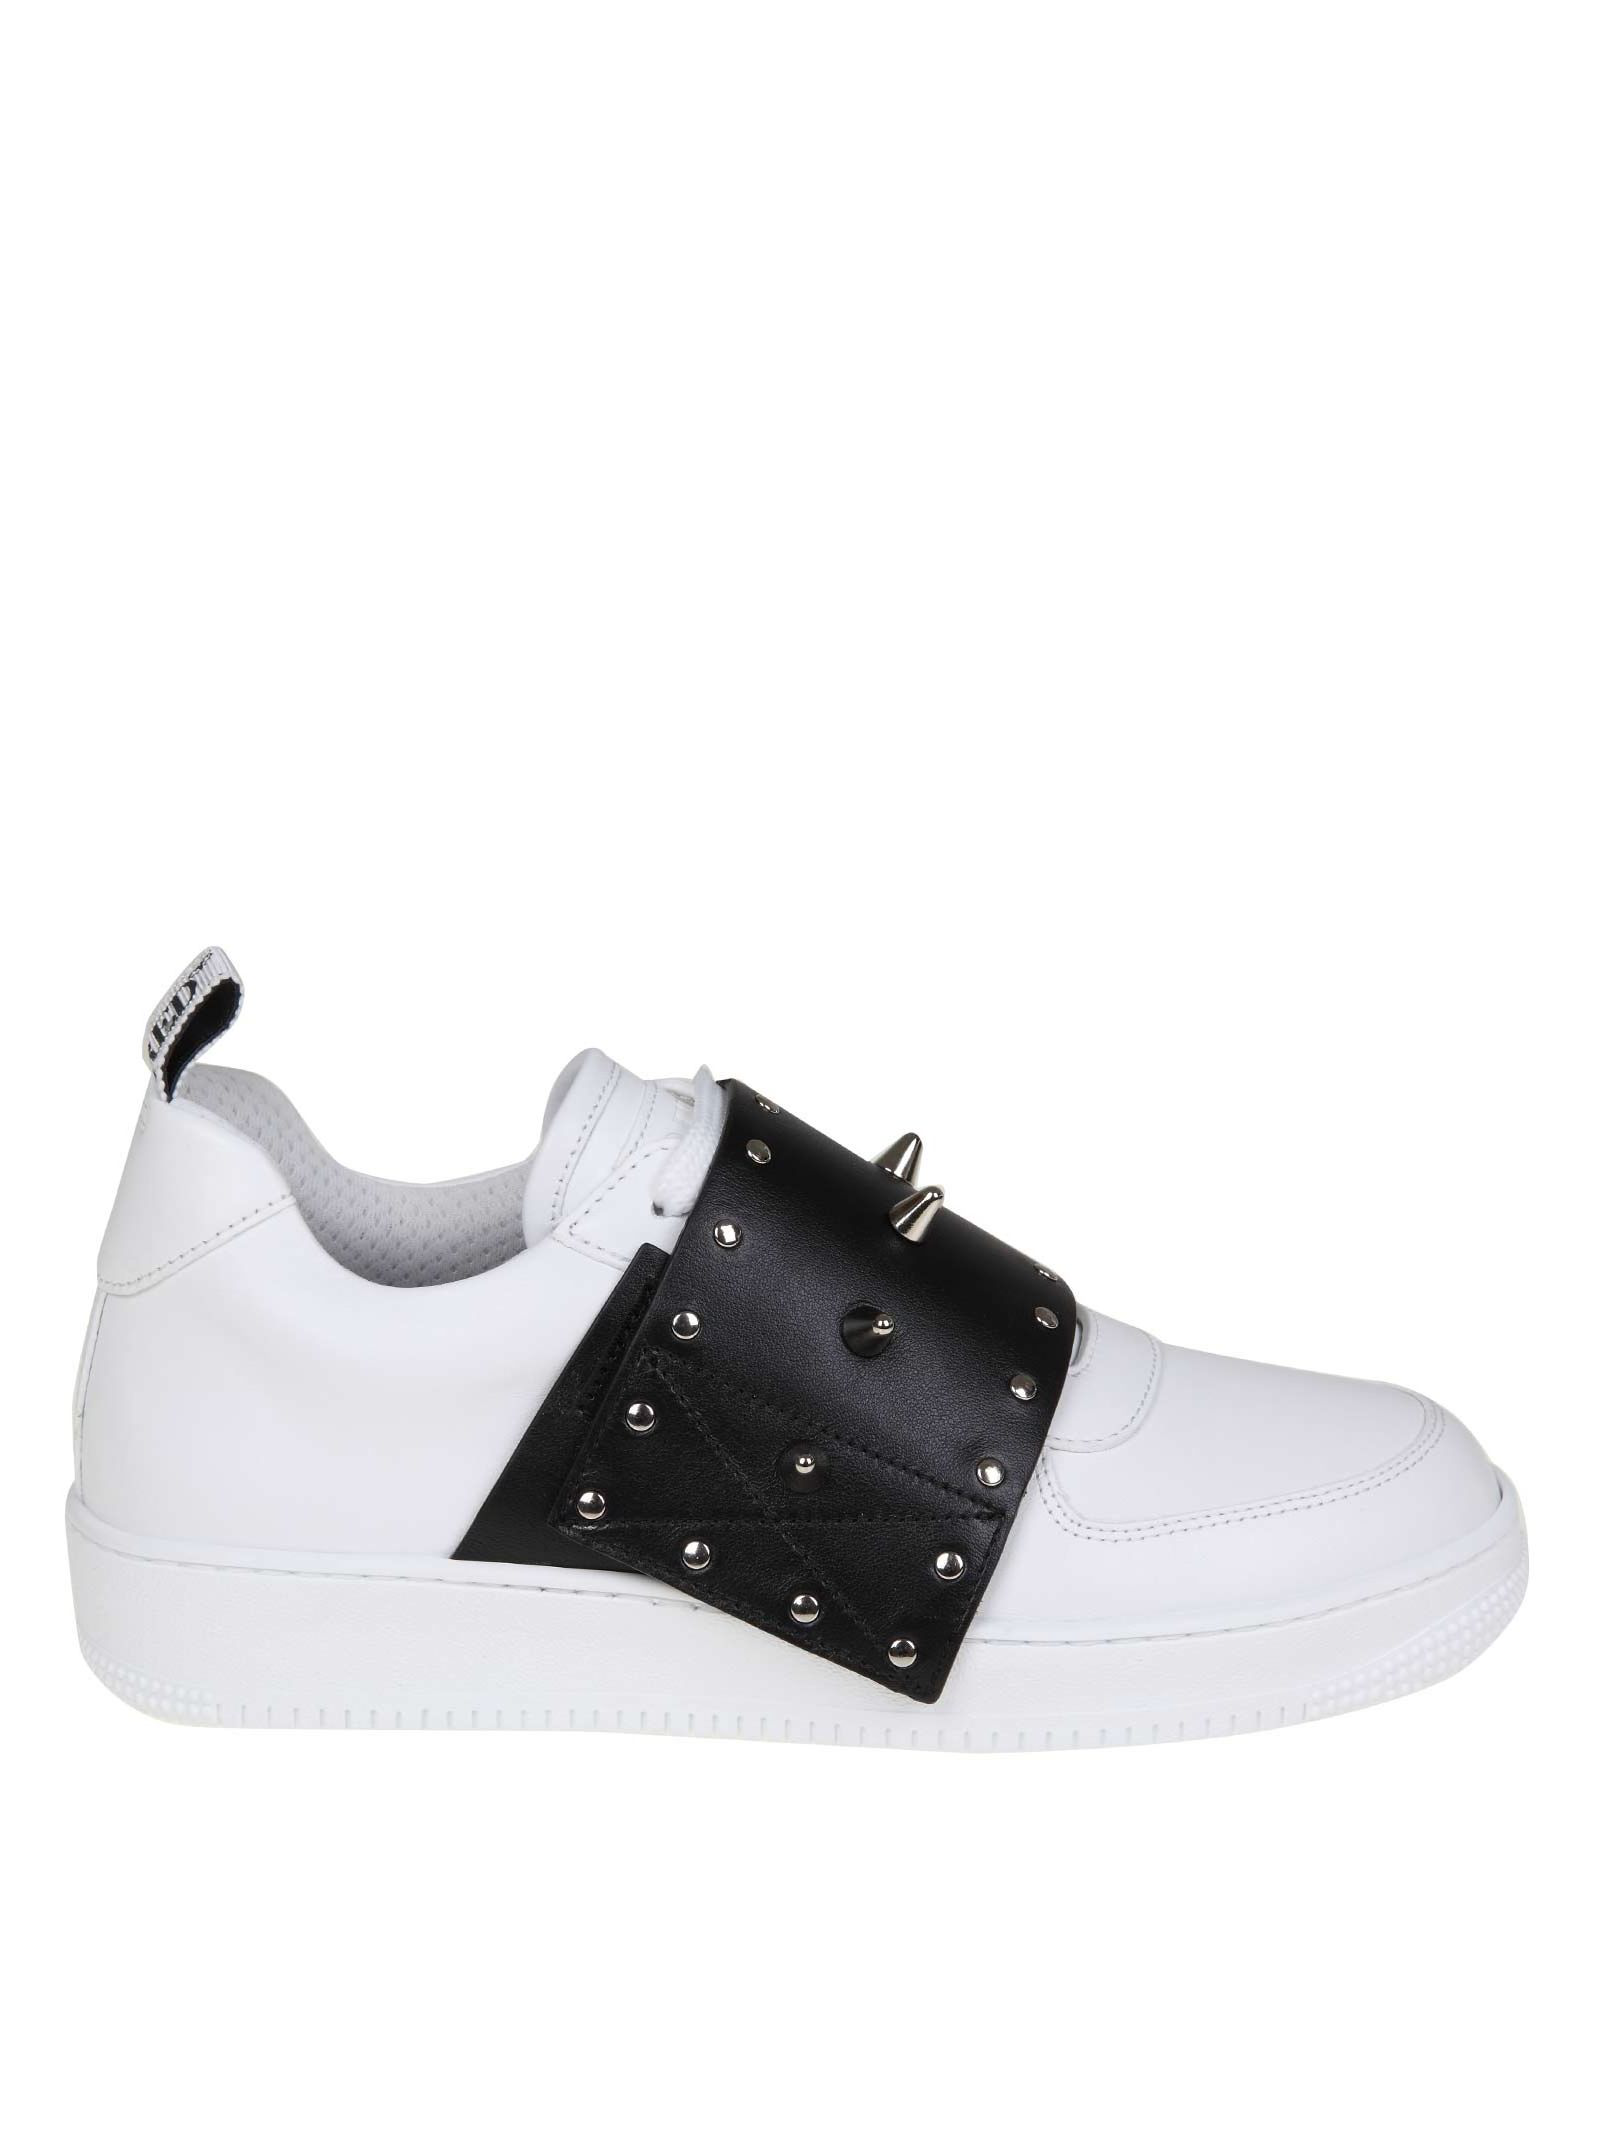 red valentino sneakers on sale